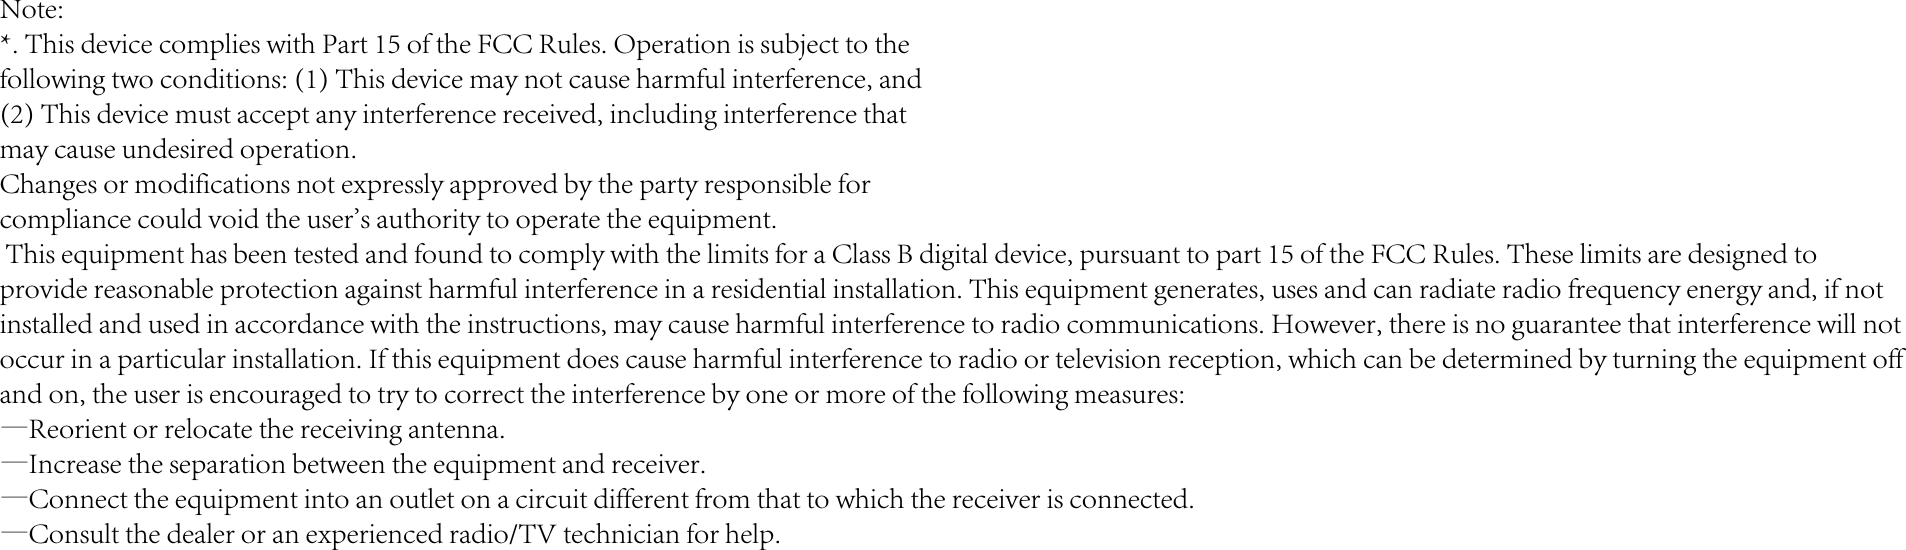 Note:*. This device complies with Part 15 of the FCC Rules. Operation is subject to thefollowing two conditions: (1) This device may not cause harmful interference, and(2) This device must accept any interference received, including interference thatmay cause undesired operation.Changes or modifications not expressly approved by the party responsible forcompliance could void the user&apos;s authority to operate the equipment. This equipment has been tested and found to comply with the limits for a Class B digital device, pursuant to part 15 of the FCC Rules. These limits are designed toprovide reasonable protection against harmful interference in a residential installation. This equipment generates, uses and can radiate radio frequency energy and, if notinstalled and used in accordance with the instructions, may cause harmful interference to radio communications. However, there is no guarantee that interference will notoccur in a particular installation. If this equipment does cause harmful interference to radio or television reception, which can be determined by turning the equipment offand on, the user is encouraged to try to correct the interference by one or more of the following measures:—Reorient or relocate the receiving antenna.—Increase the separation between the equipment and receiver.—Connect the equipment into an outlet on a circuit different from that to which the receiver is connected.—Consult the dealer or an experienced radio/TV technician for help.